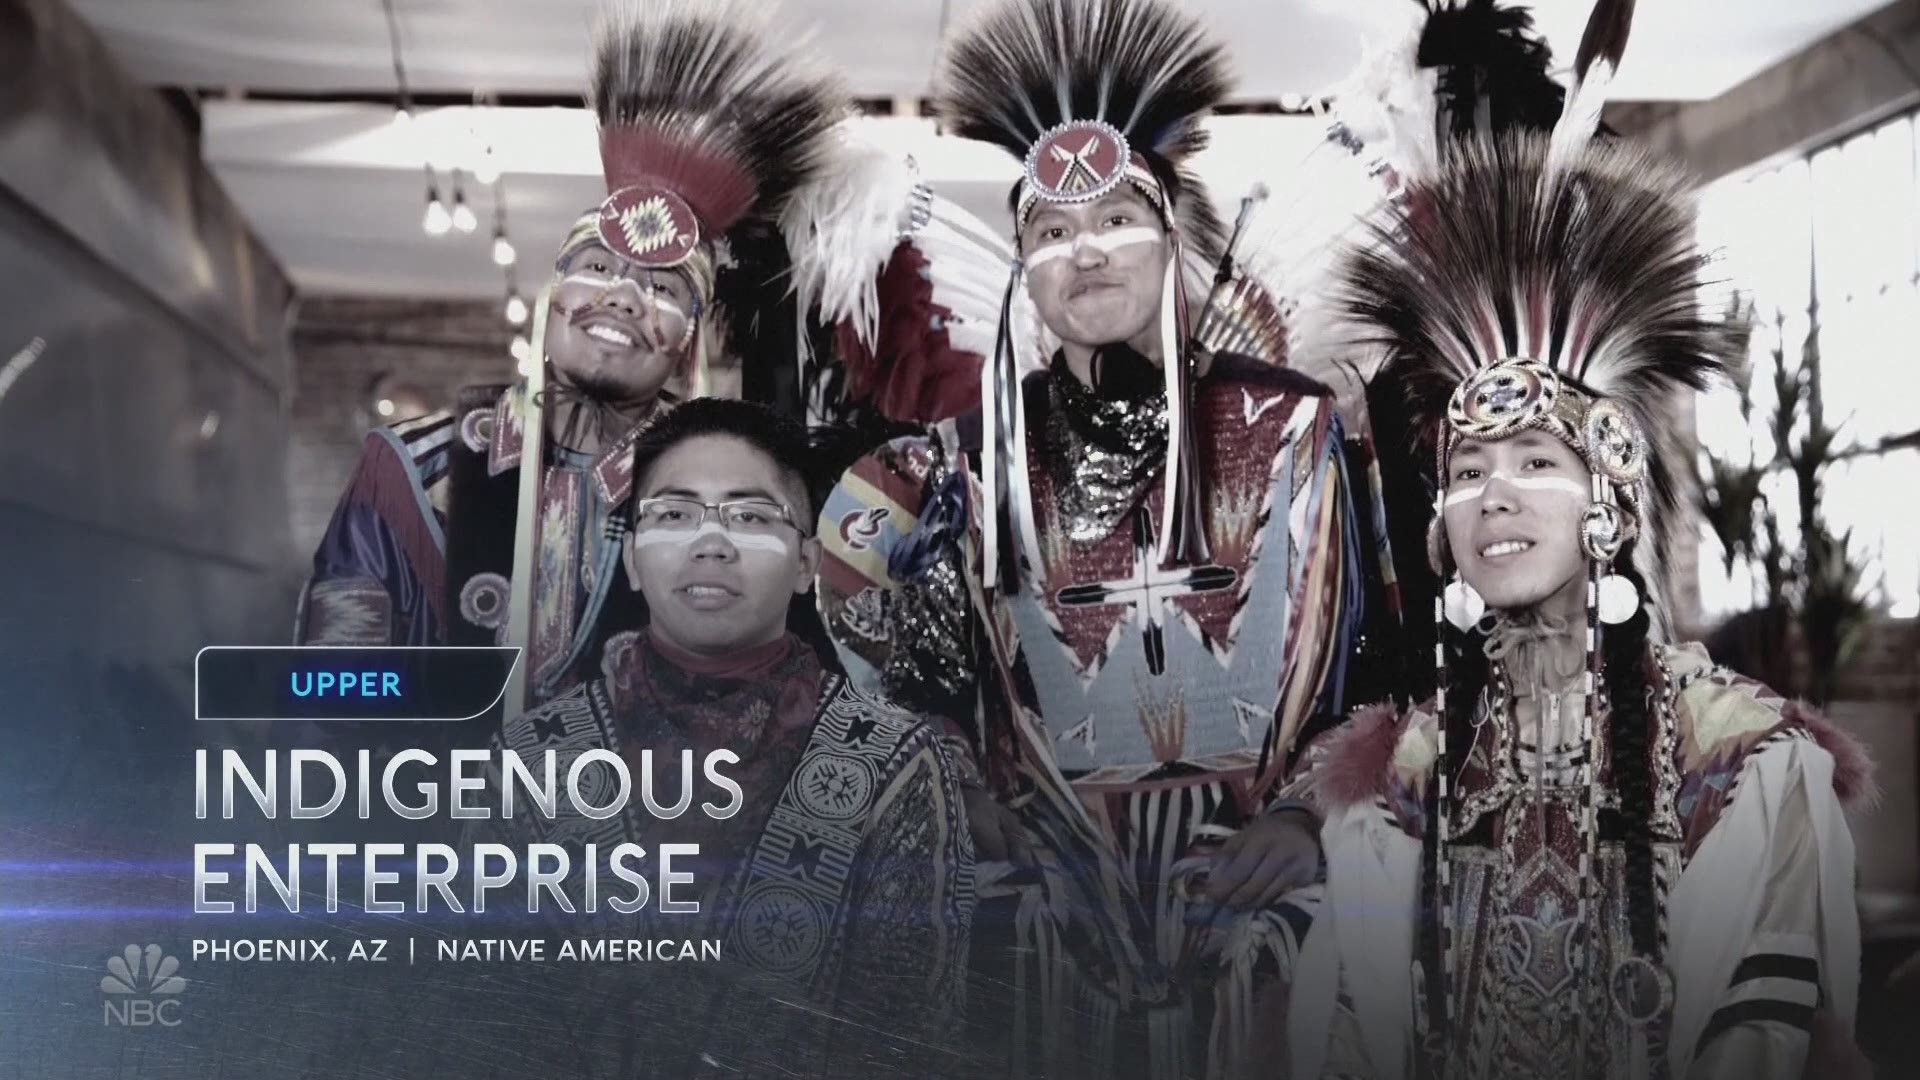 Indigenous Enterprise hopes to educate the world about Natite American culture through performing different styles of traditional dances.